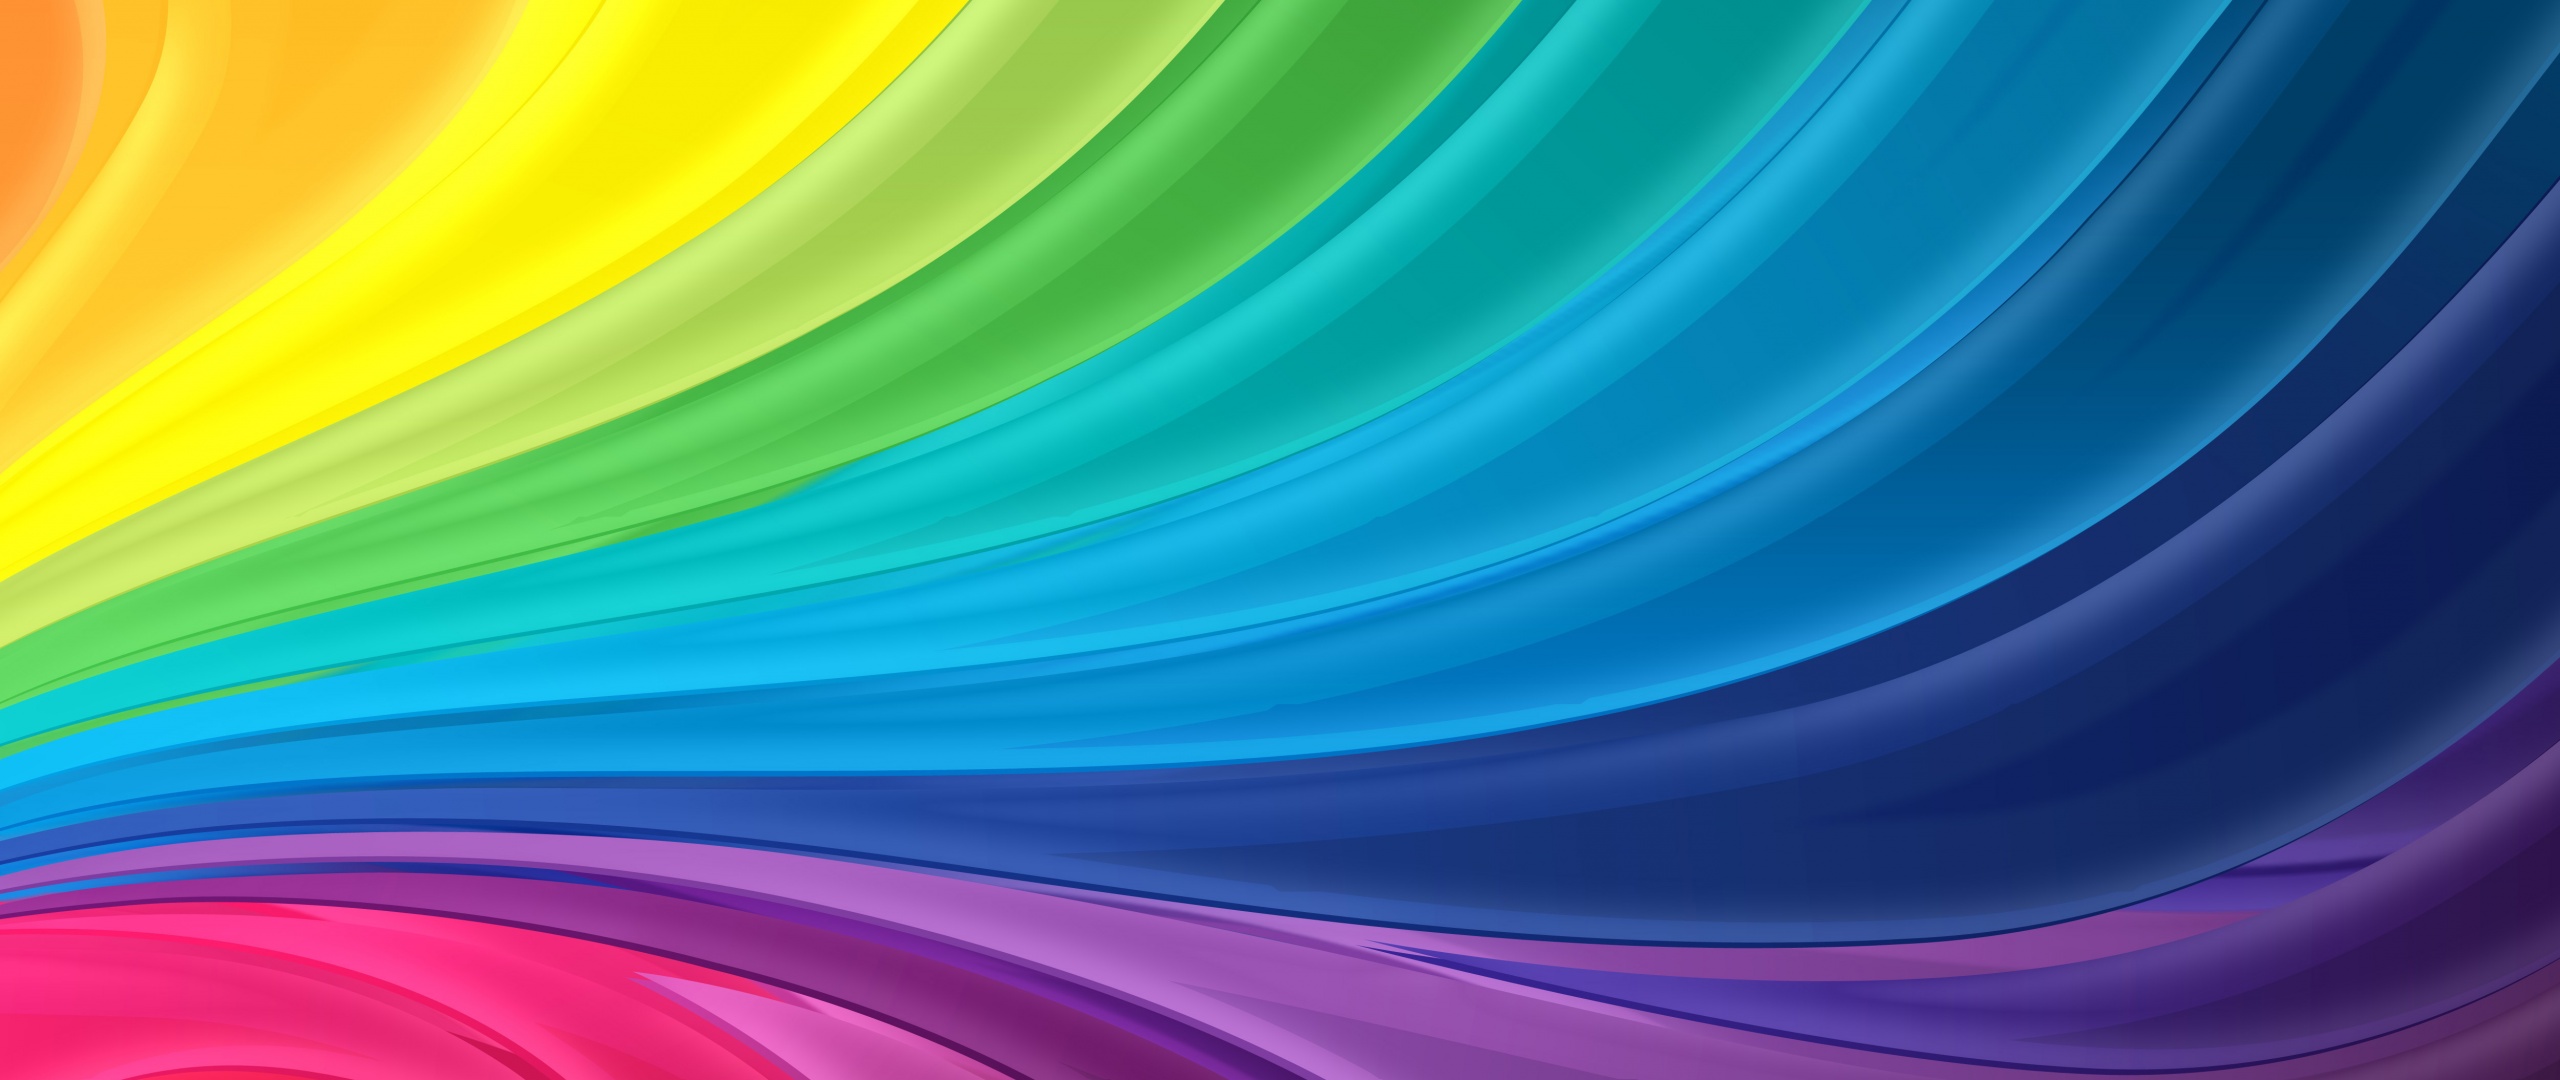 Rainbow colors Wallpaper 4K, Colorful, Multi color, Abstract, #1765